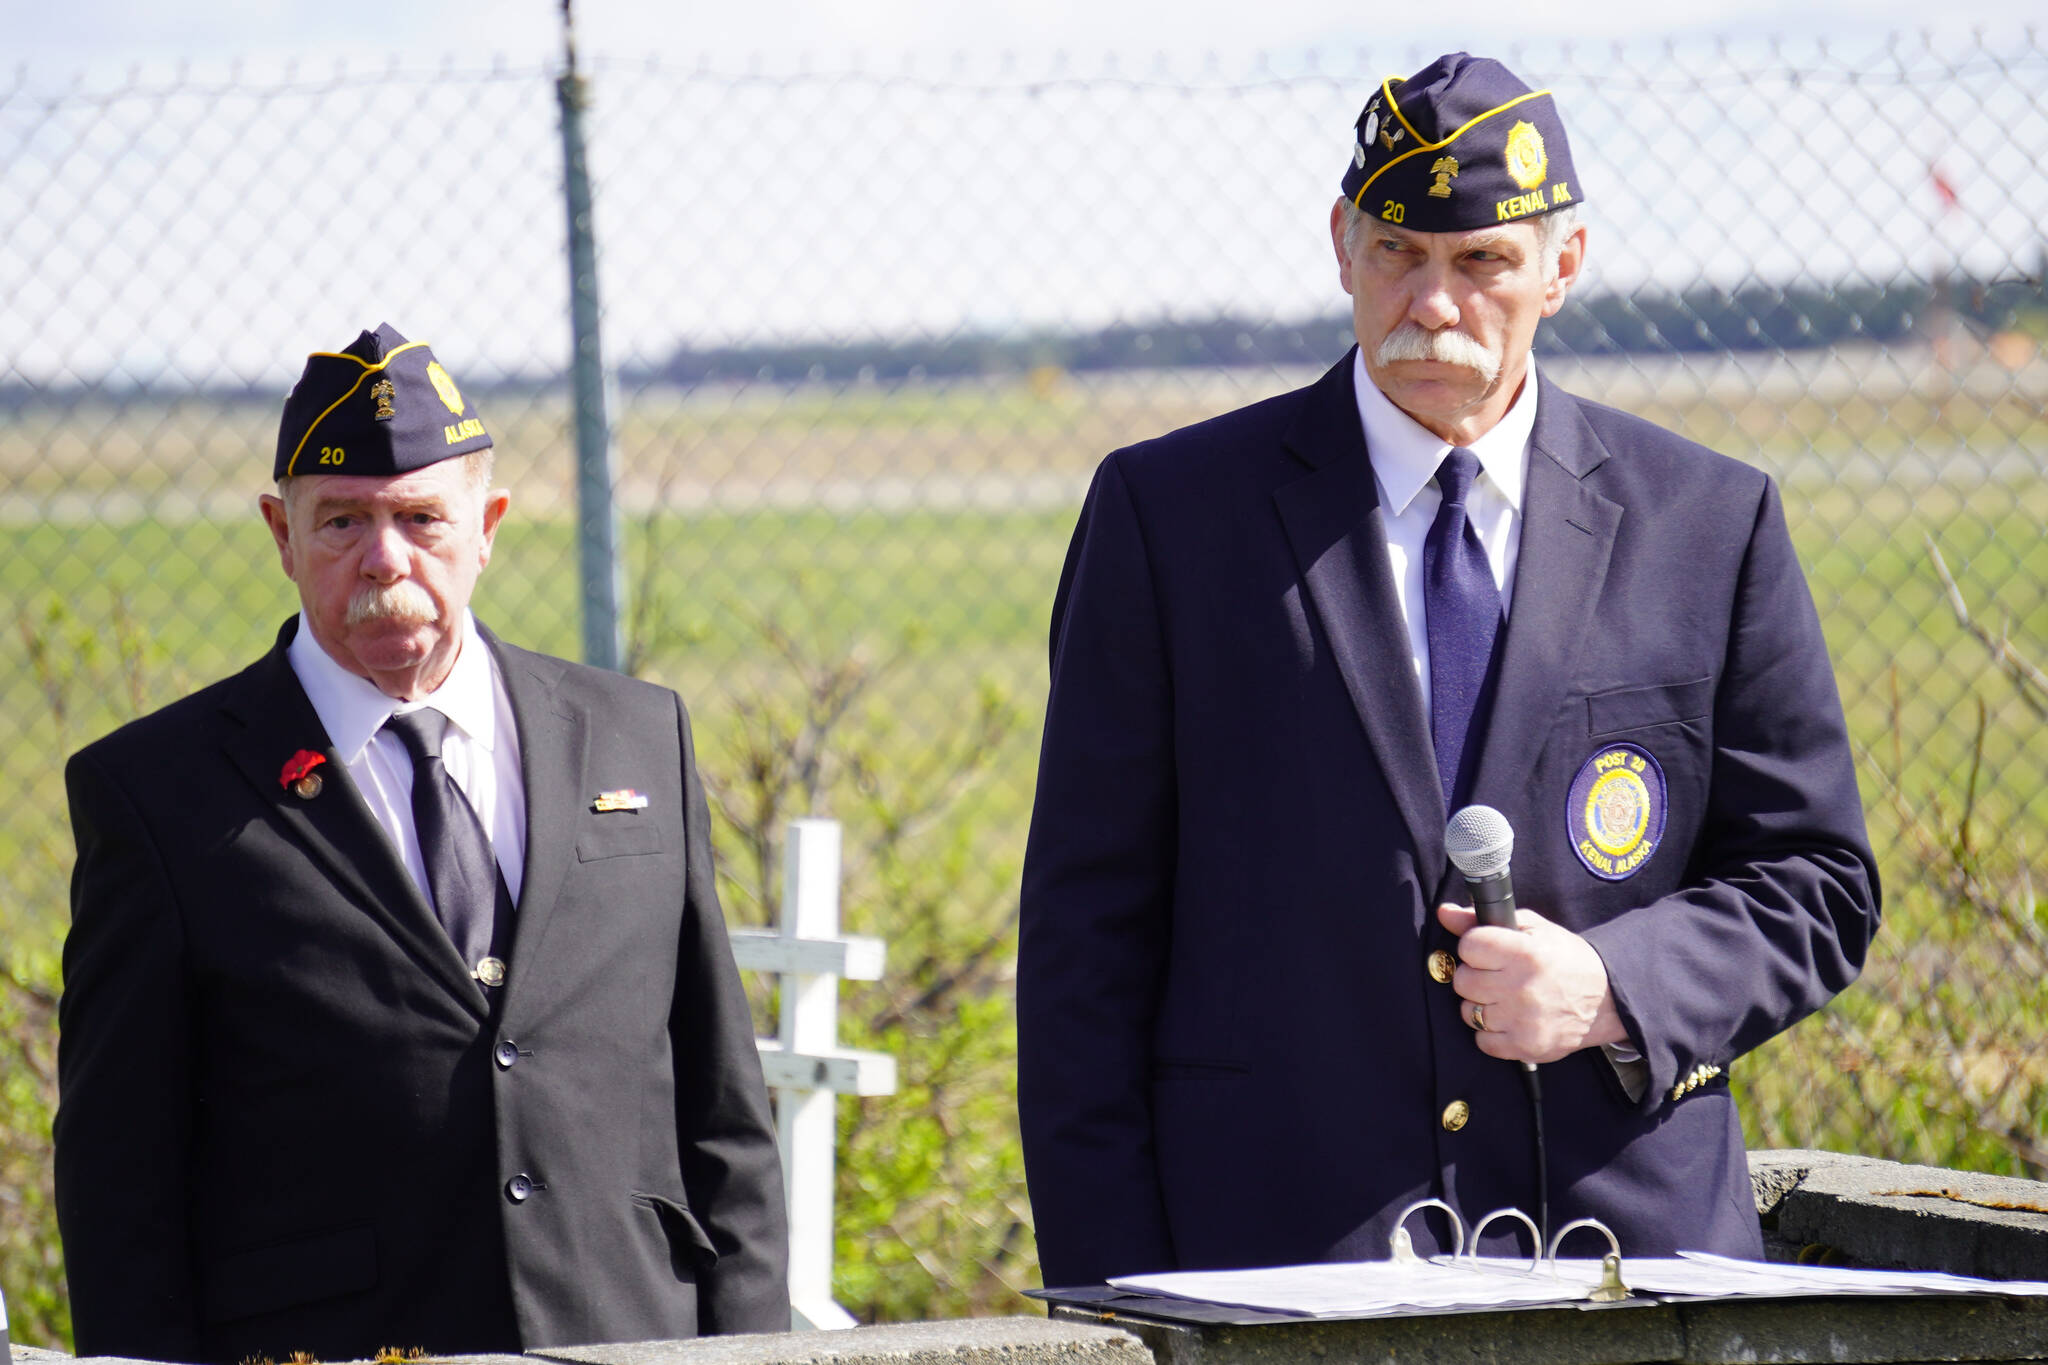 American Legion Post 20 Chaplain Mike Meredith and Cmdr. Ron Homan stand during a Memorial Day ceremony on Monday, May 29, 2023, at the Kenai Cemetery in Kenai, Alaska. (Jake Dye/Peninsula Clarion)